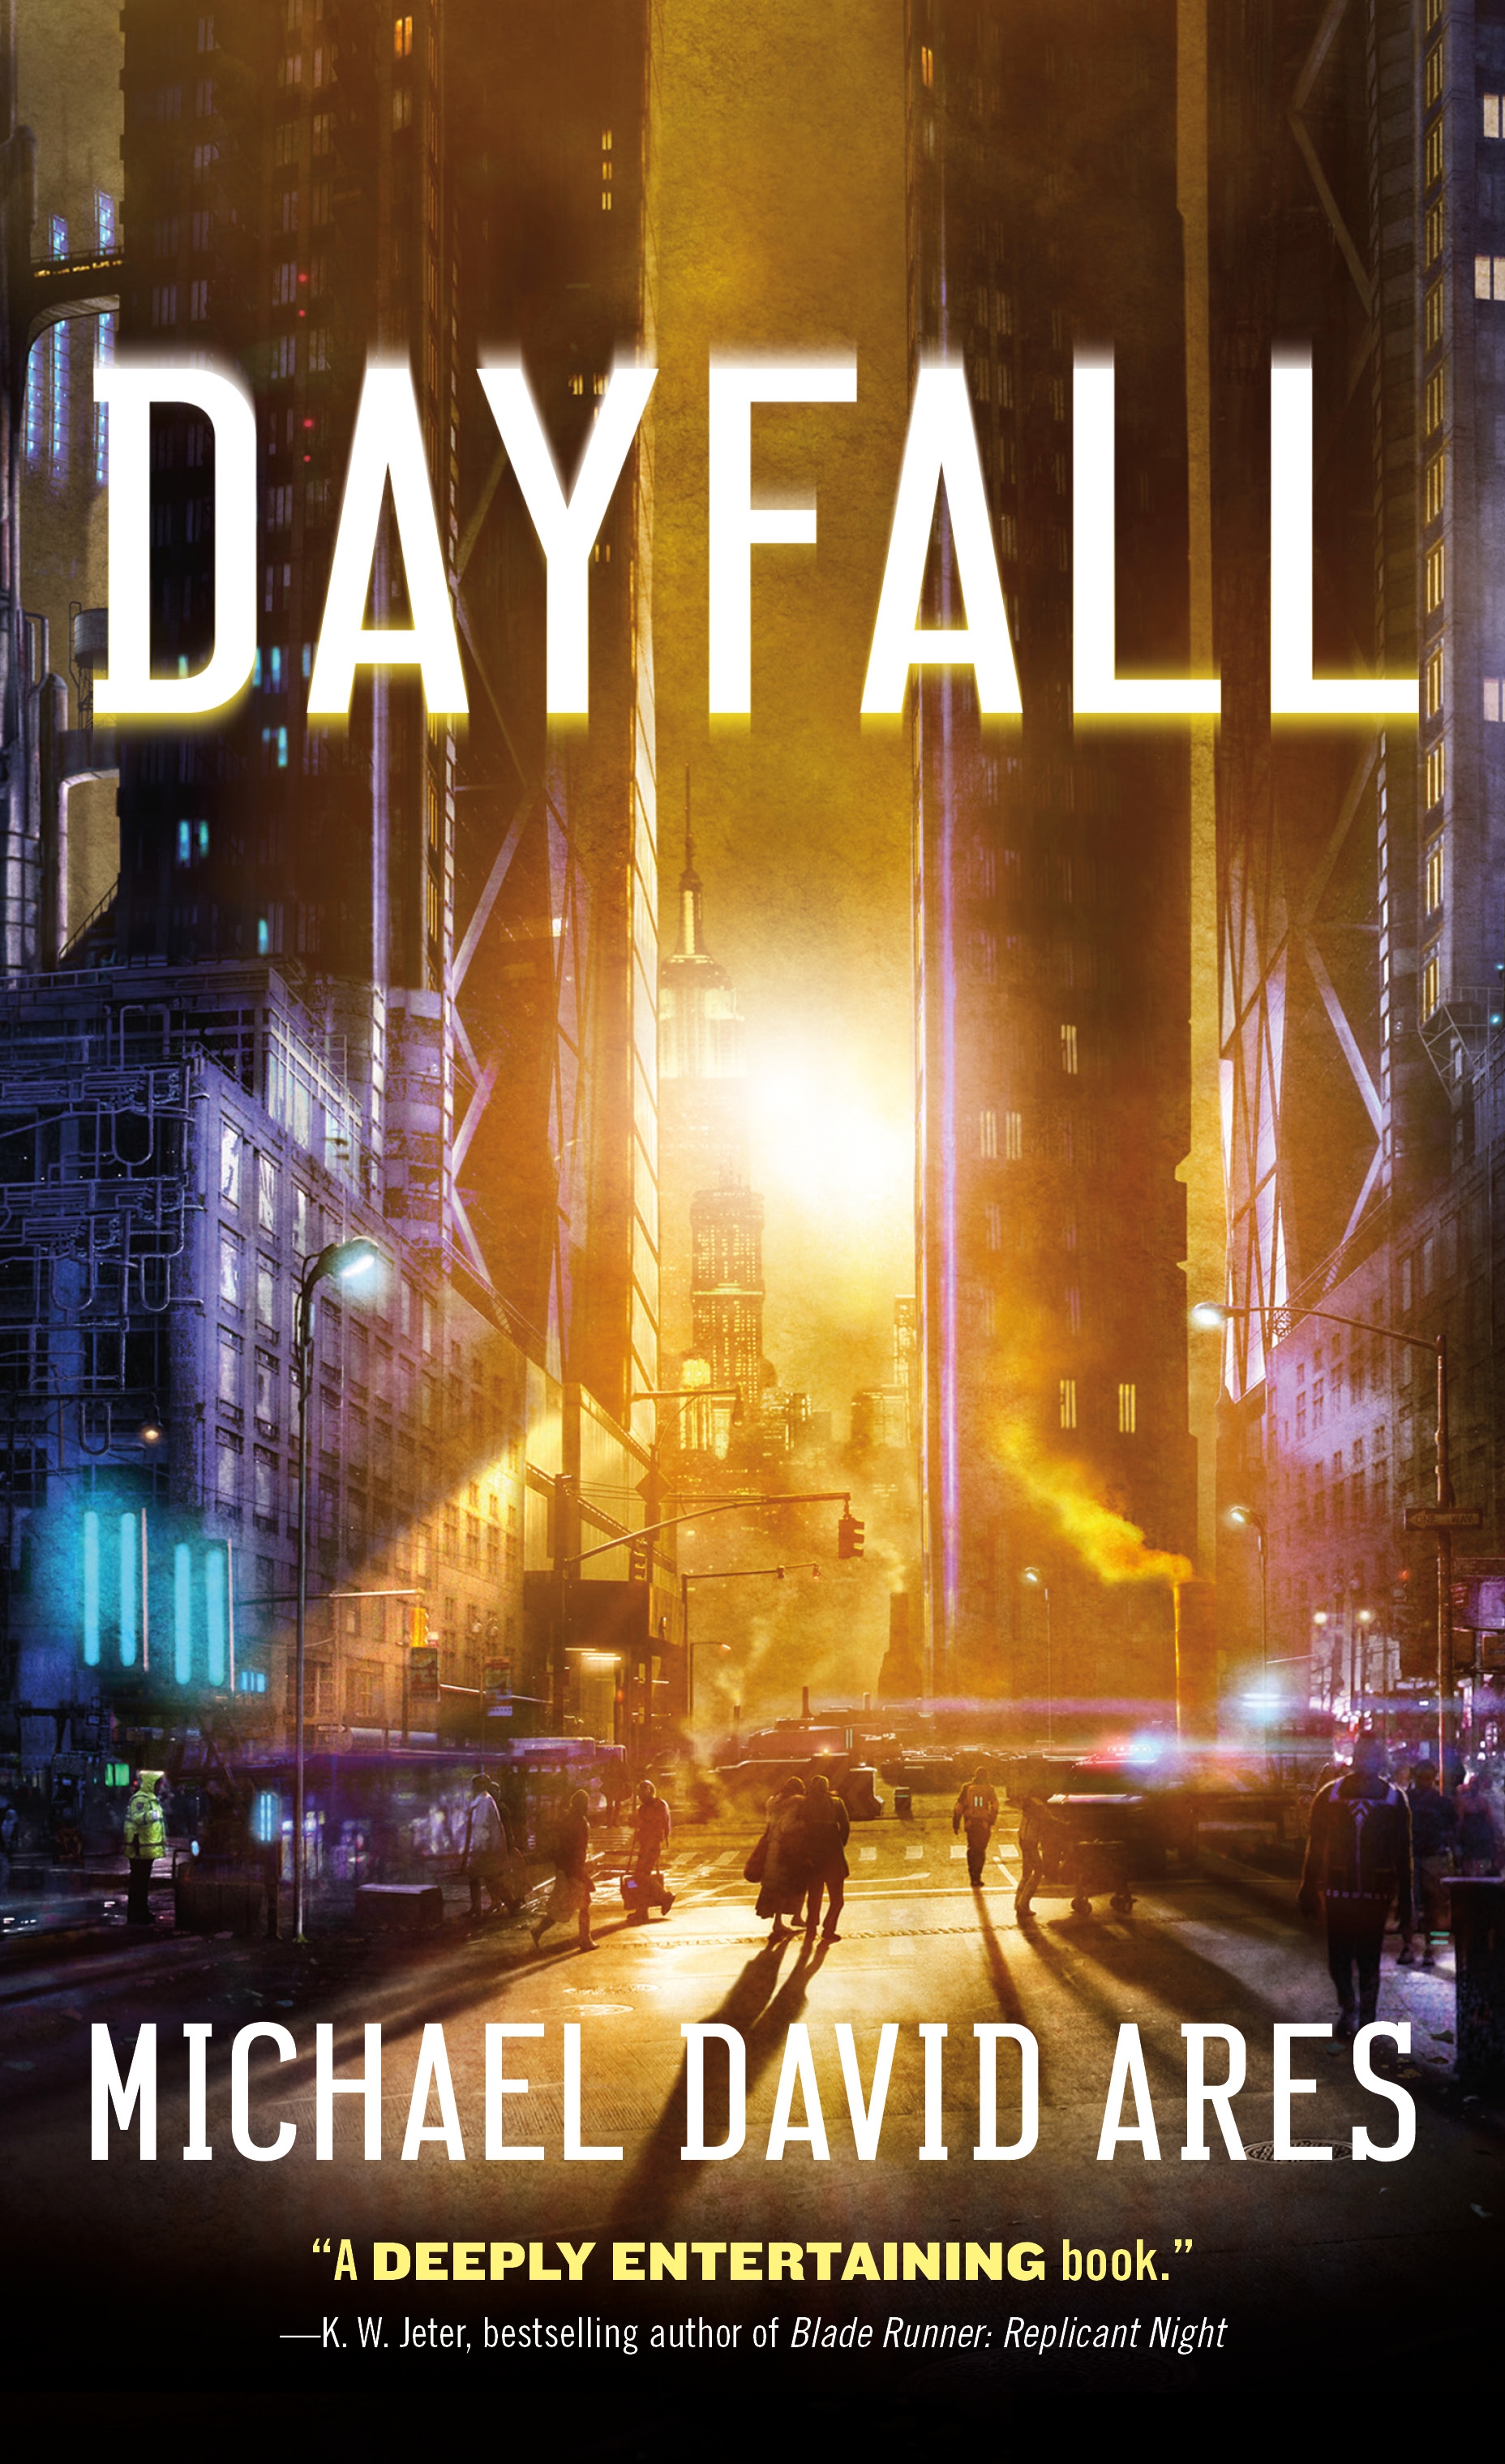 Dayfall : A Novel by Michael David Ares